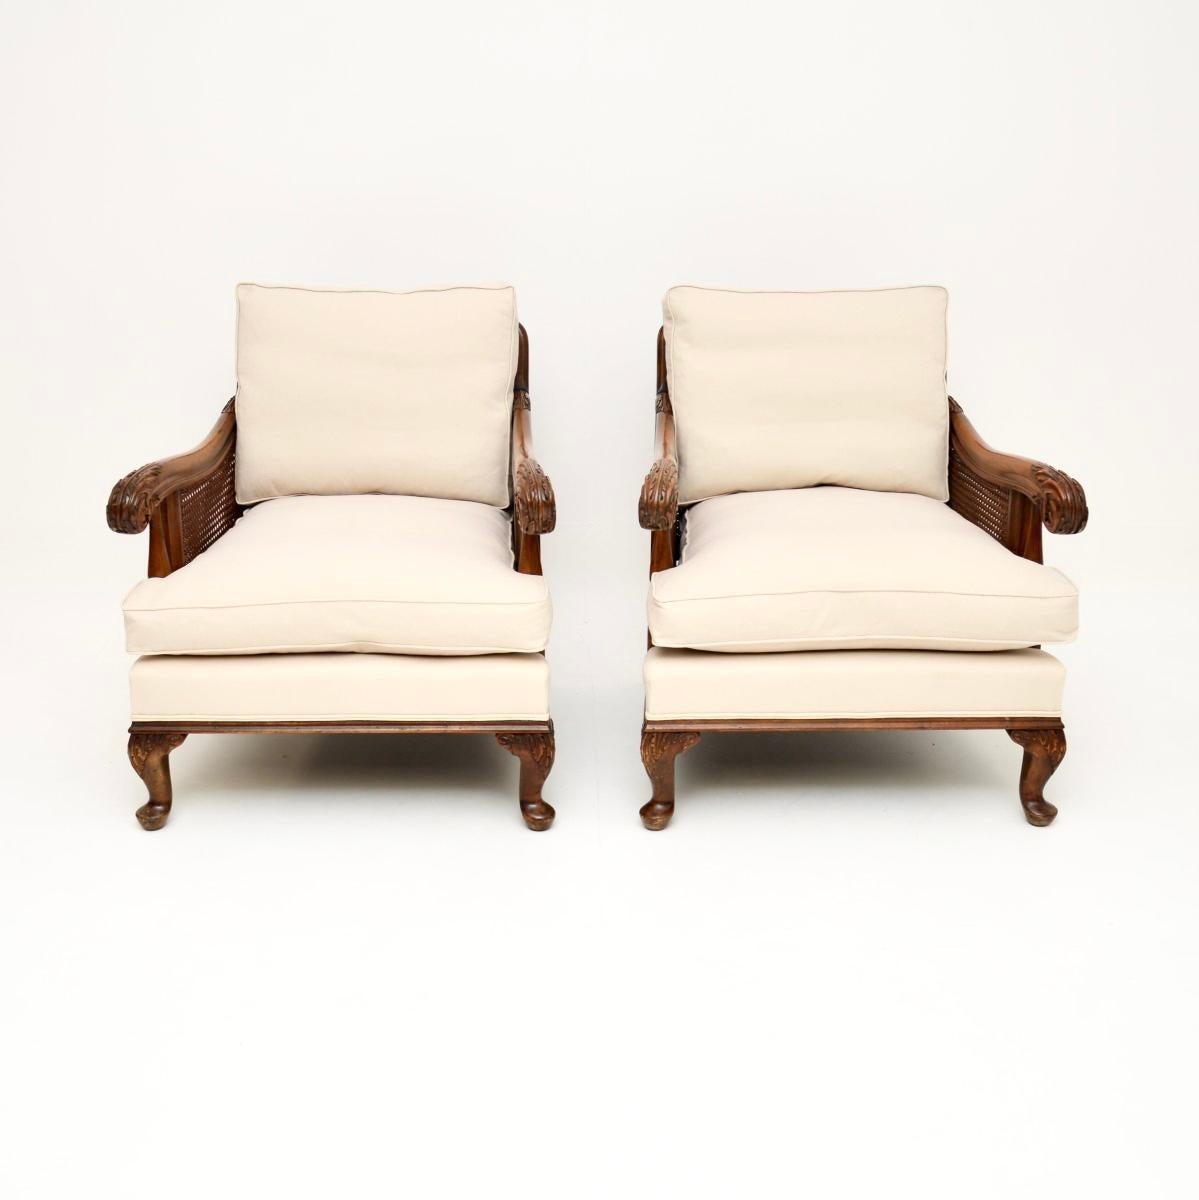 A stunning pair of antique cane bergere armchairs, made in England and dating from around the 1910-20’s.

They are of superb quality and are very comfortable. The solid birch frames are very well made, the scrolled arms and cabriole legs have